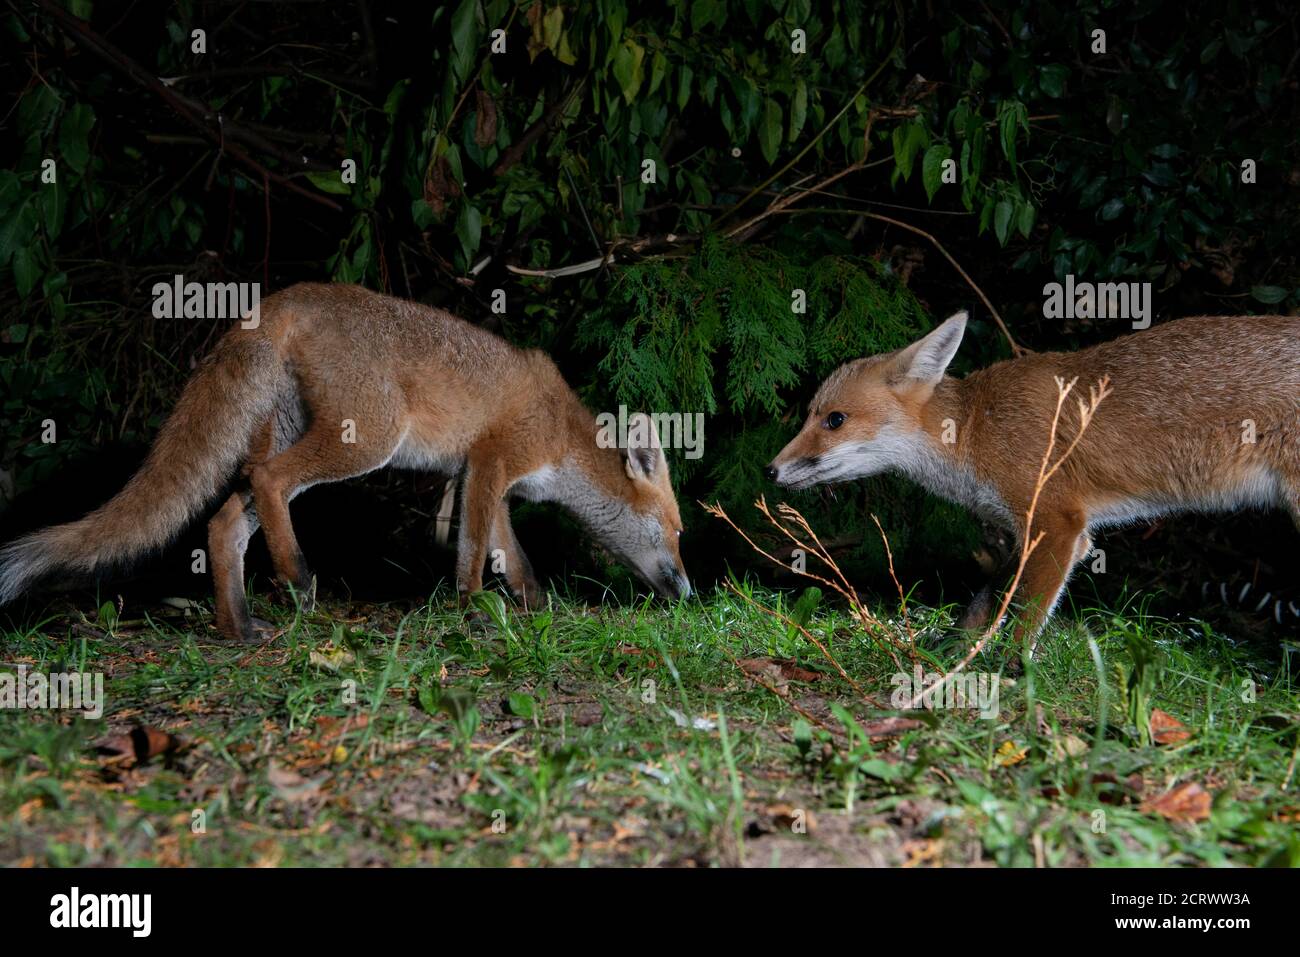 Two foxes swearing at each other, mouths open, ears back, at night in the dark Stock Photo